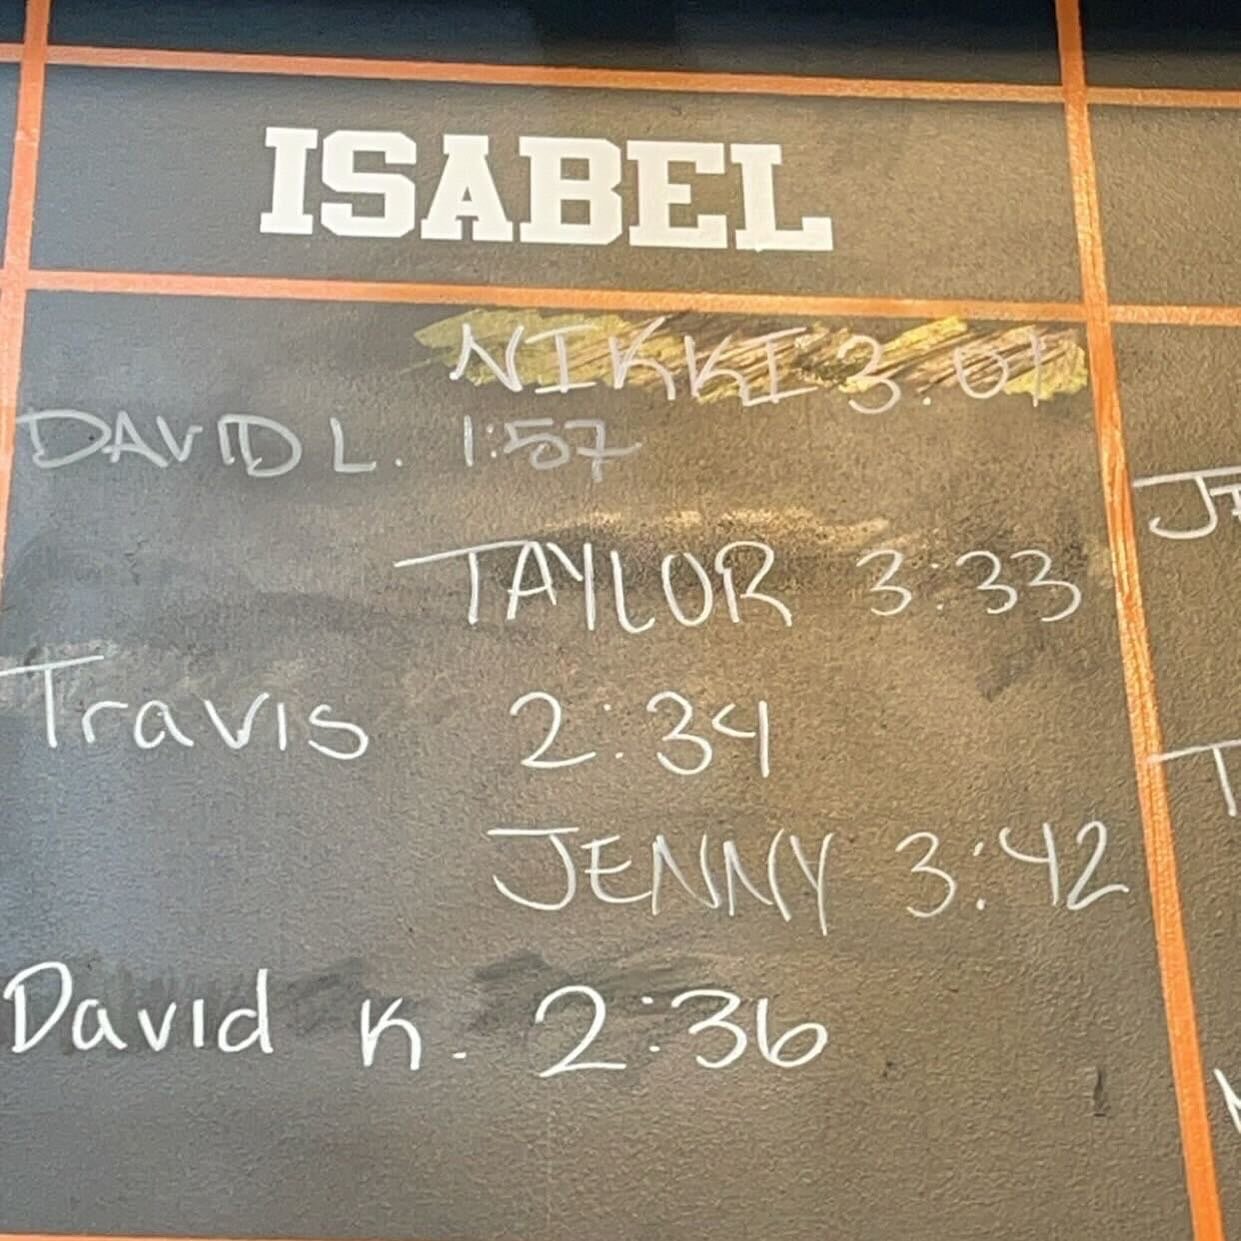 There&rsquo;s been a shake up on the gym leaderboard! Great work, athletes! 
#crossfit #turnagaincrossfitalaska #tcfakcommunity #isabel #leaderboard